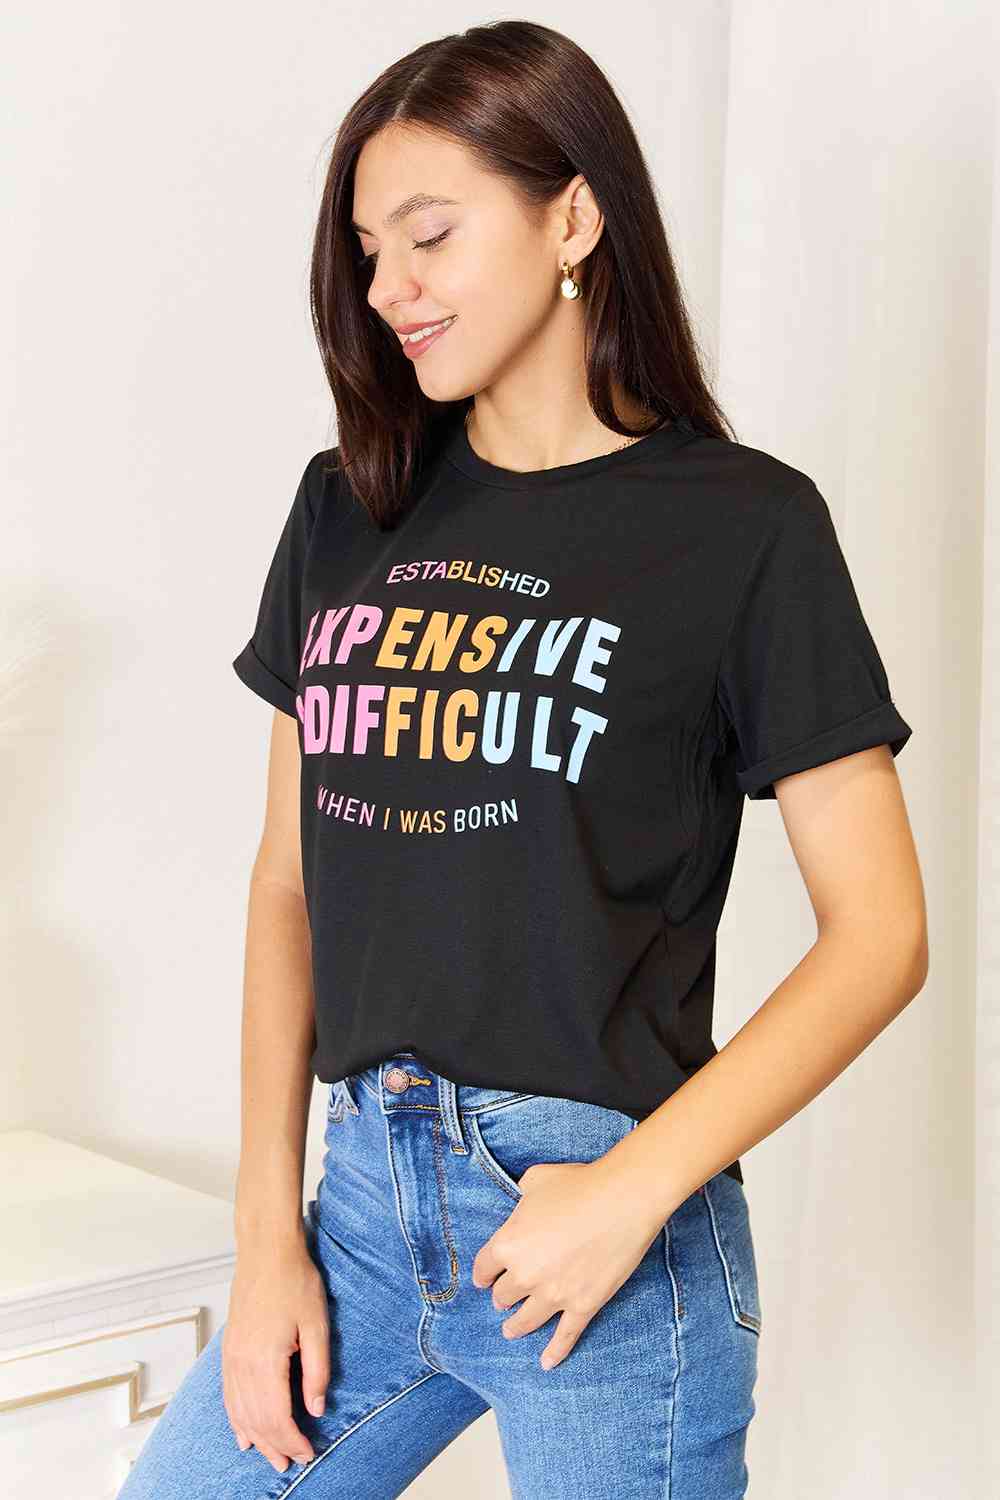 EXPENSIVE & DIFFICULT Slogan Graphic Cuffed Sleeve T-ShirtTeeSimply Love